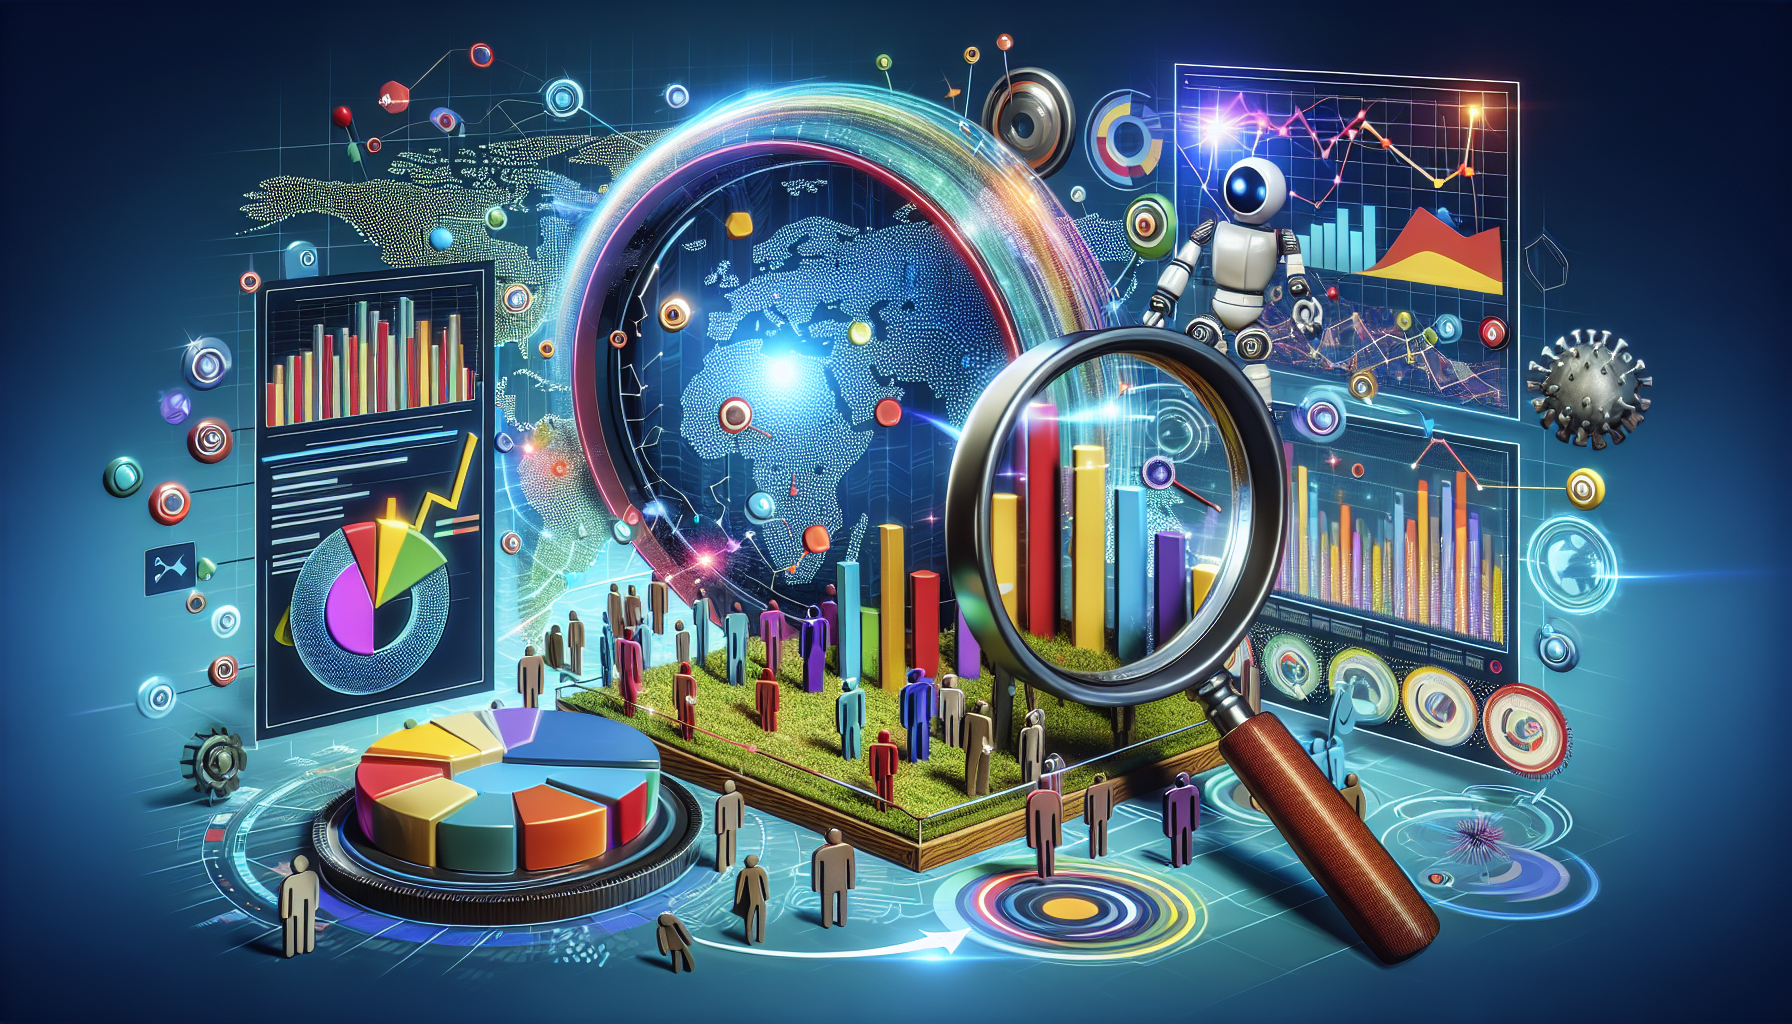 Market research tools and analytics